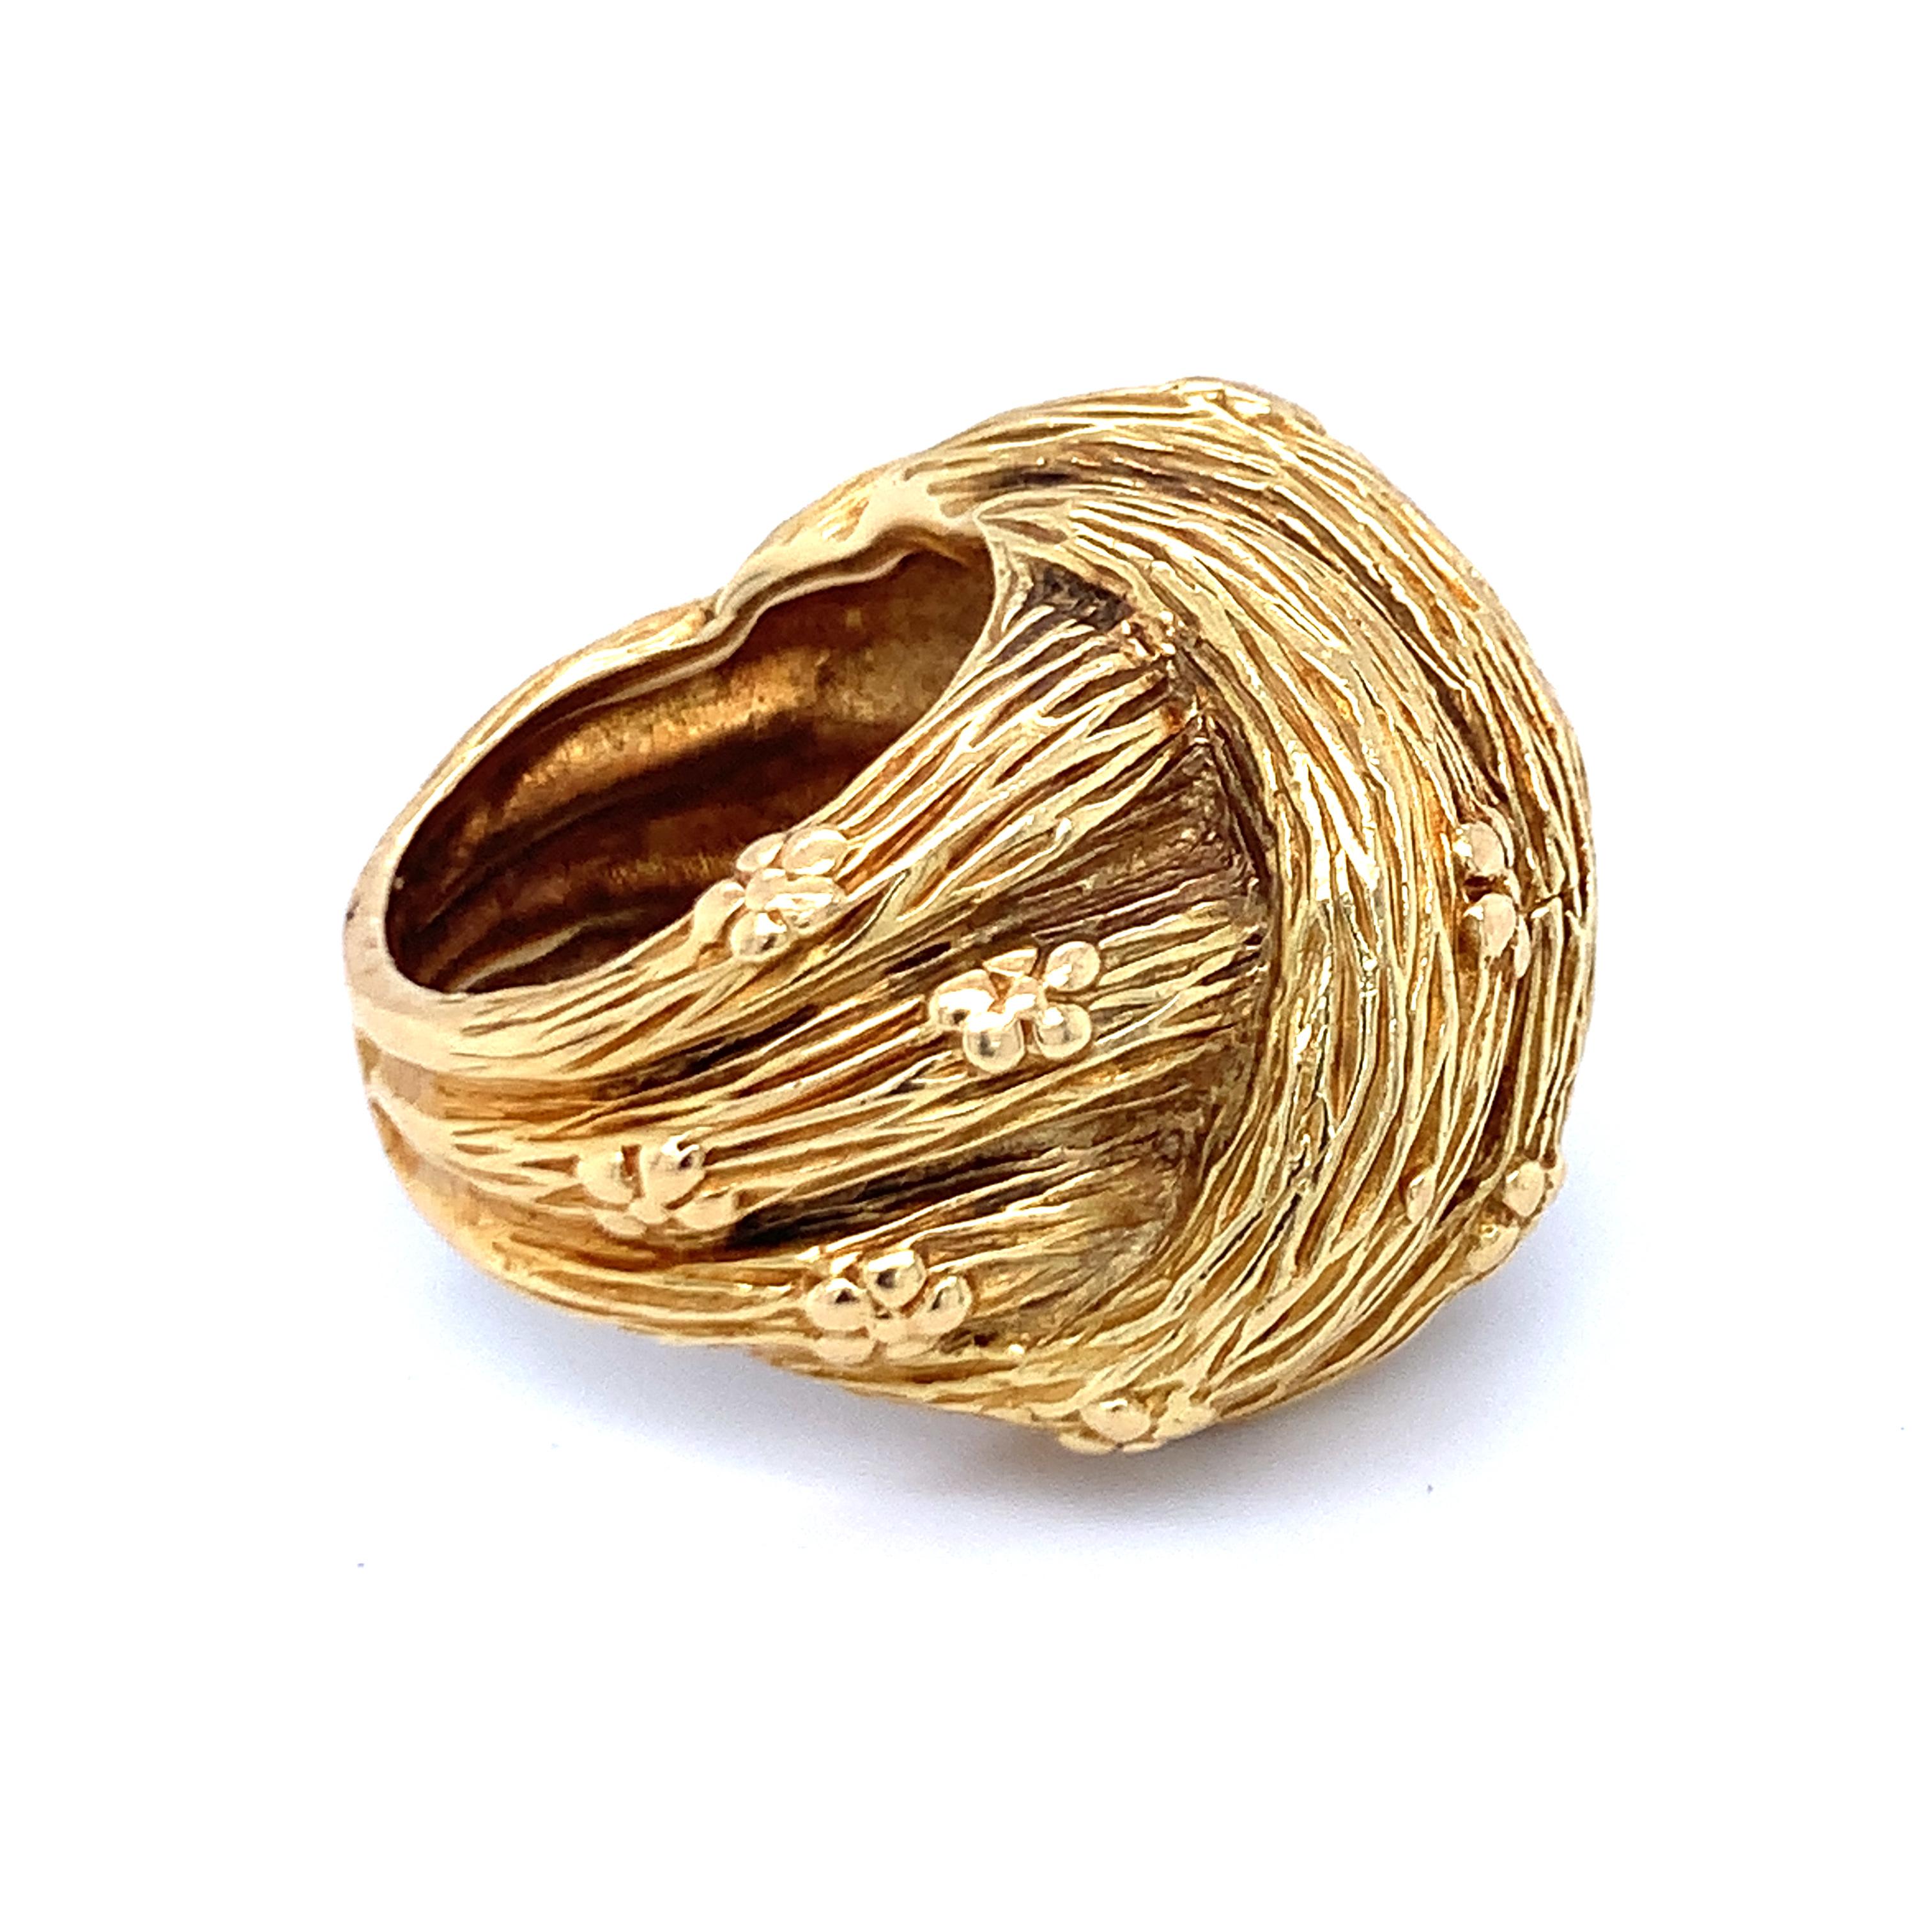 Textured Golden Knot Ring by Hammerman Brothers In Good Condition For Sale In Beverly Hills, CA